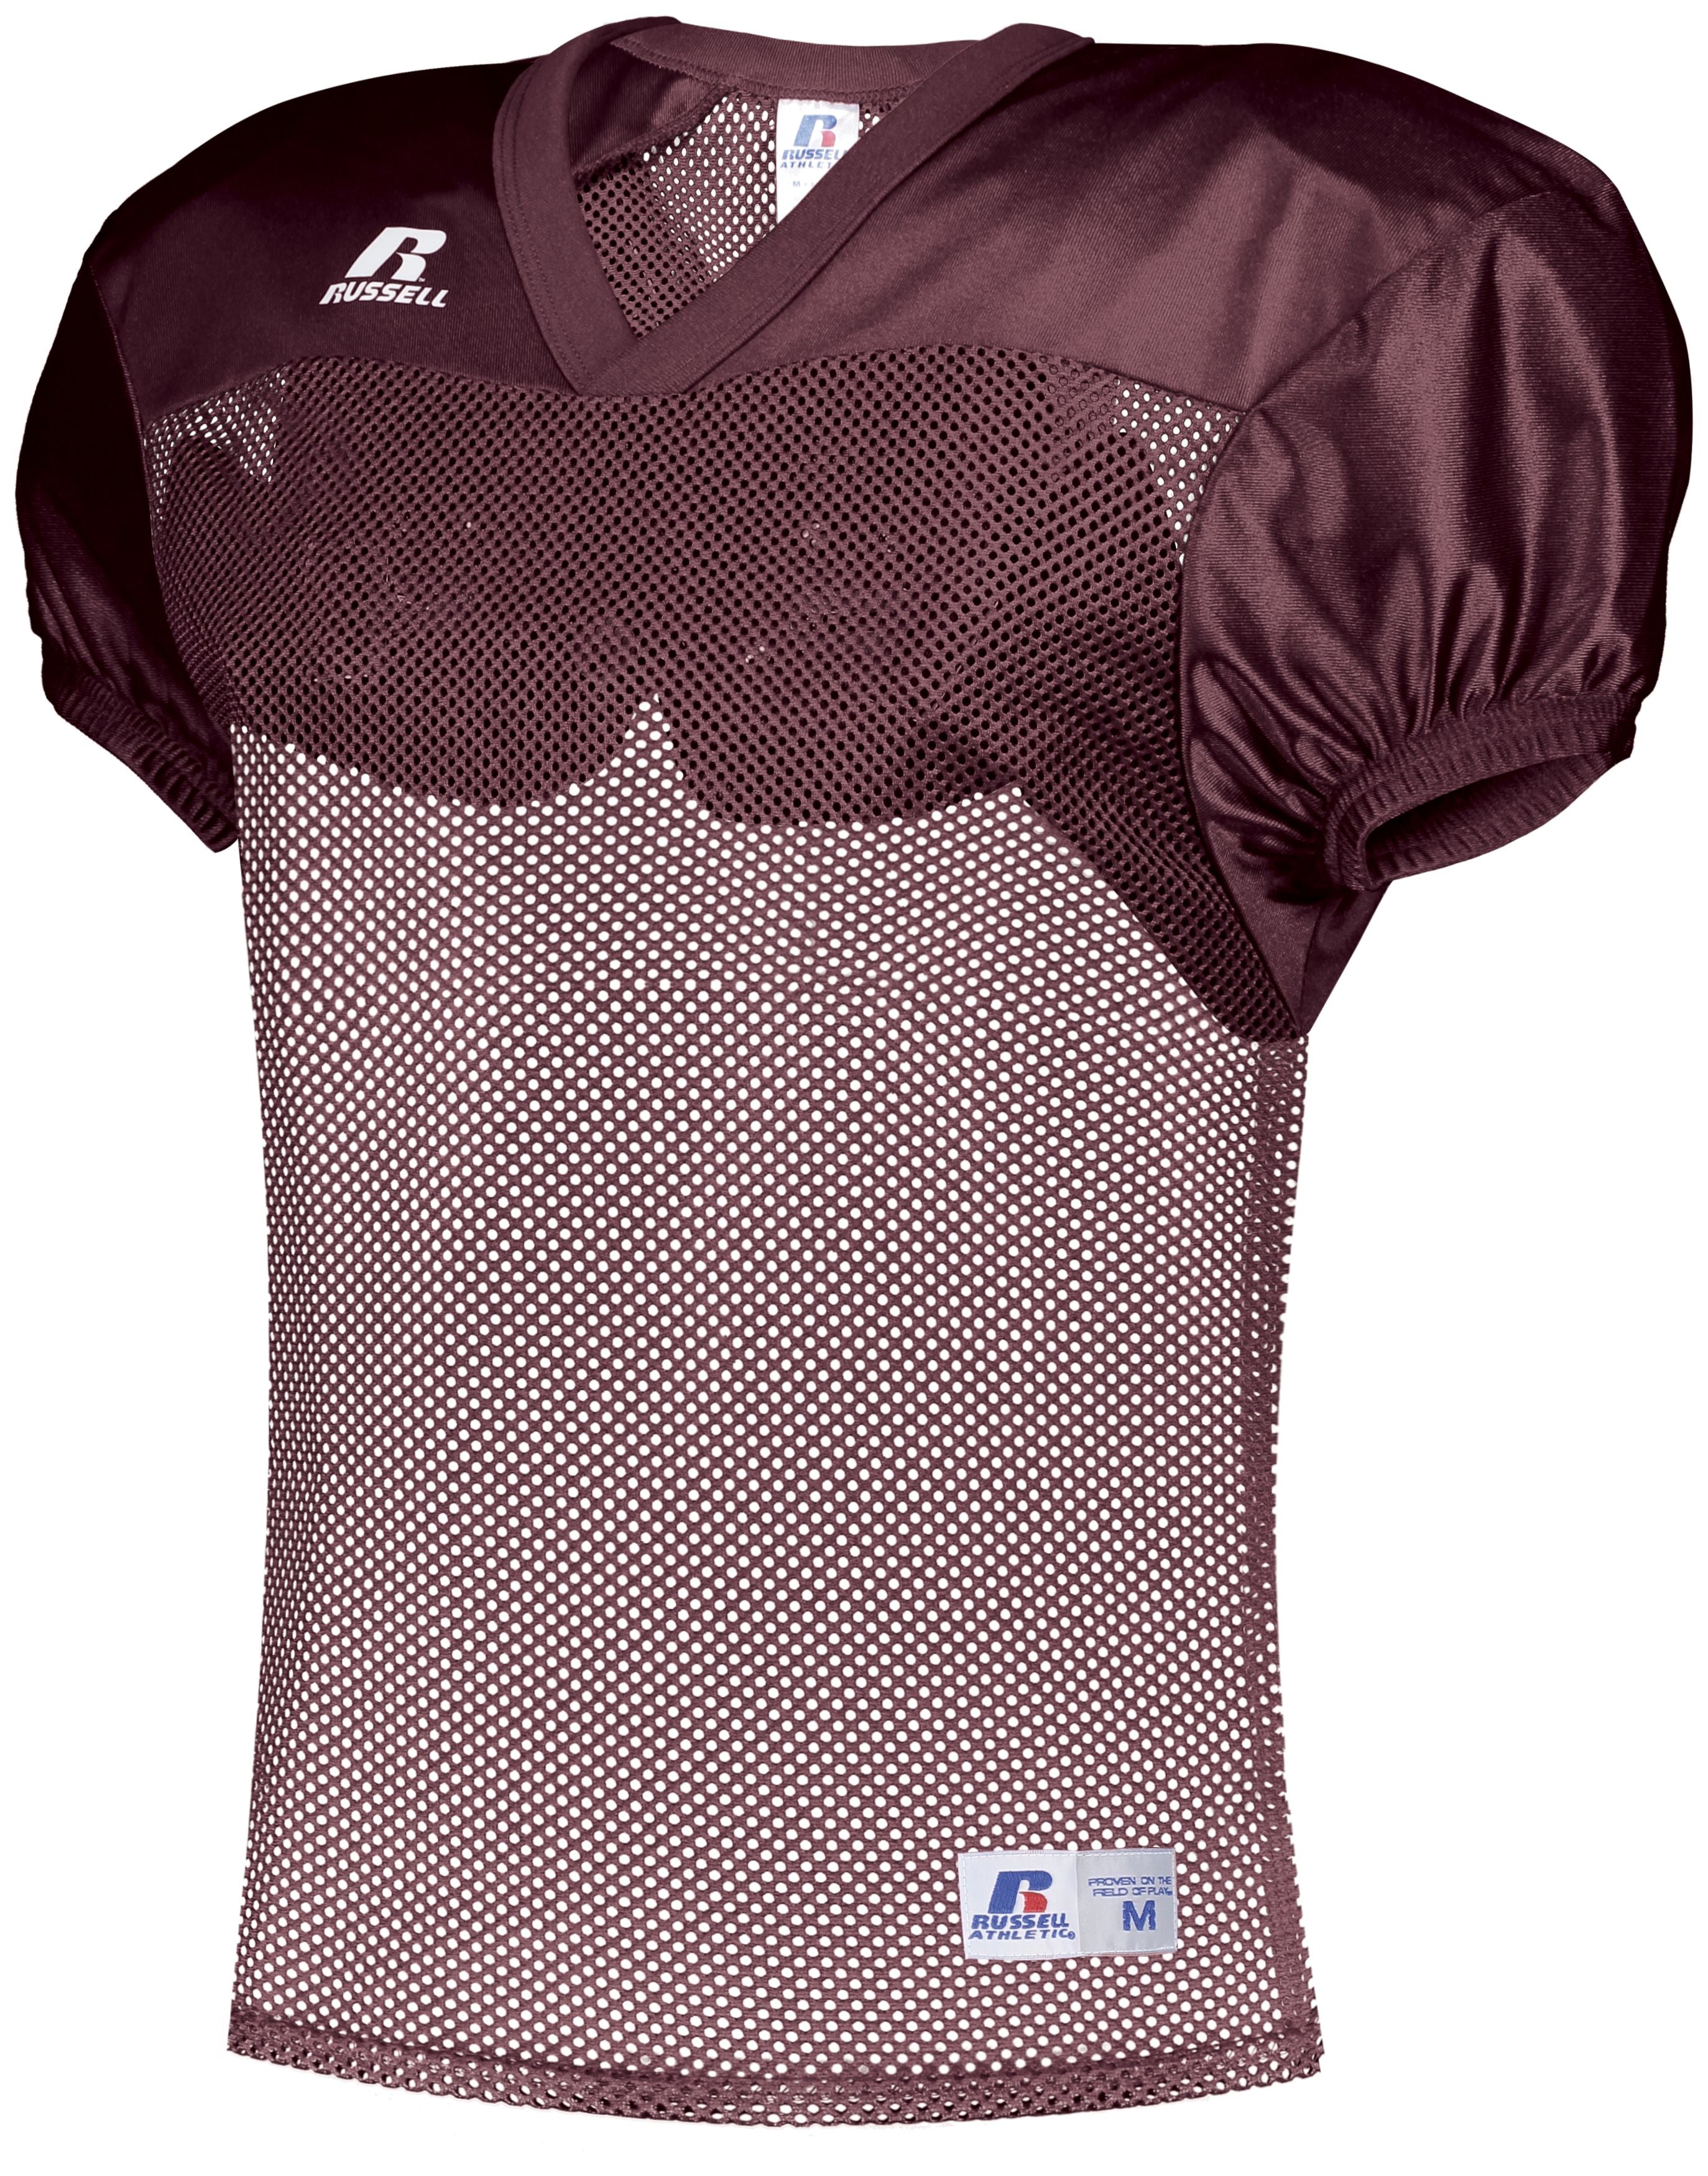 Russell Athletic Stock Practice Jersey in Maroon  -Part of the Adult, Adult-Jersey, Football, Russell-Athletic-Products, Shirts, All-Sports, All-Sports-1 product lines at KanaleyCreations.com